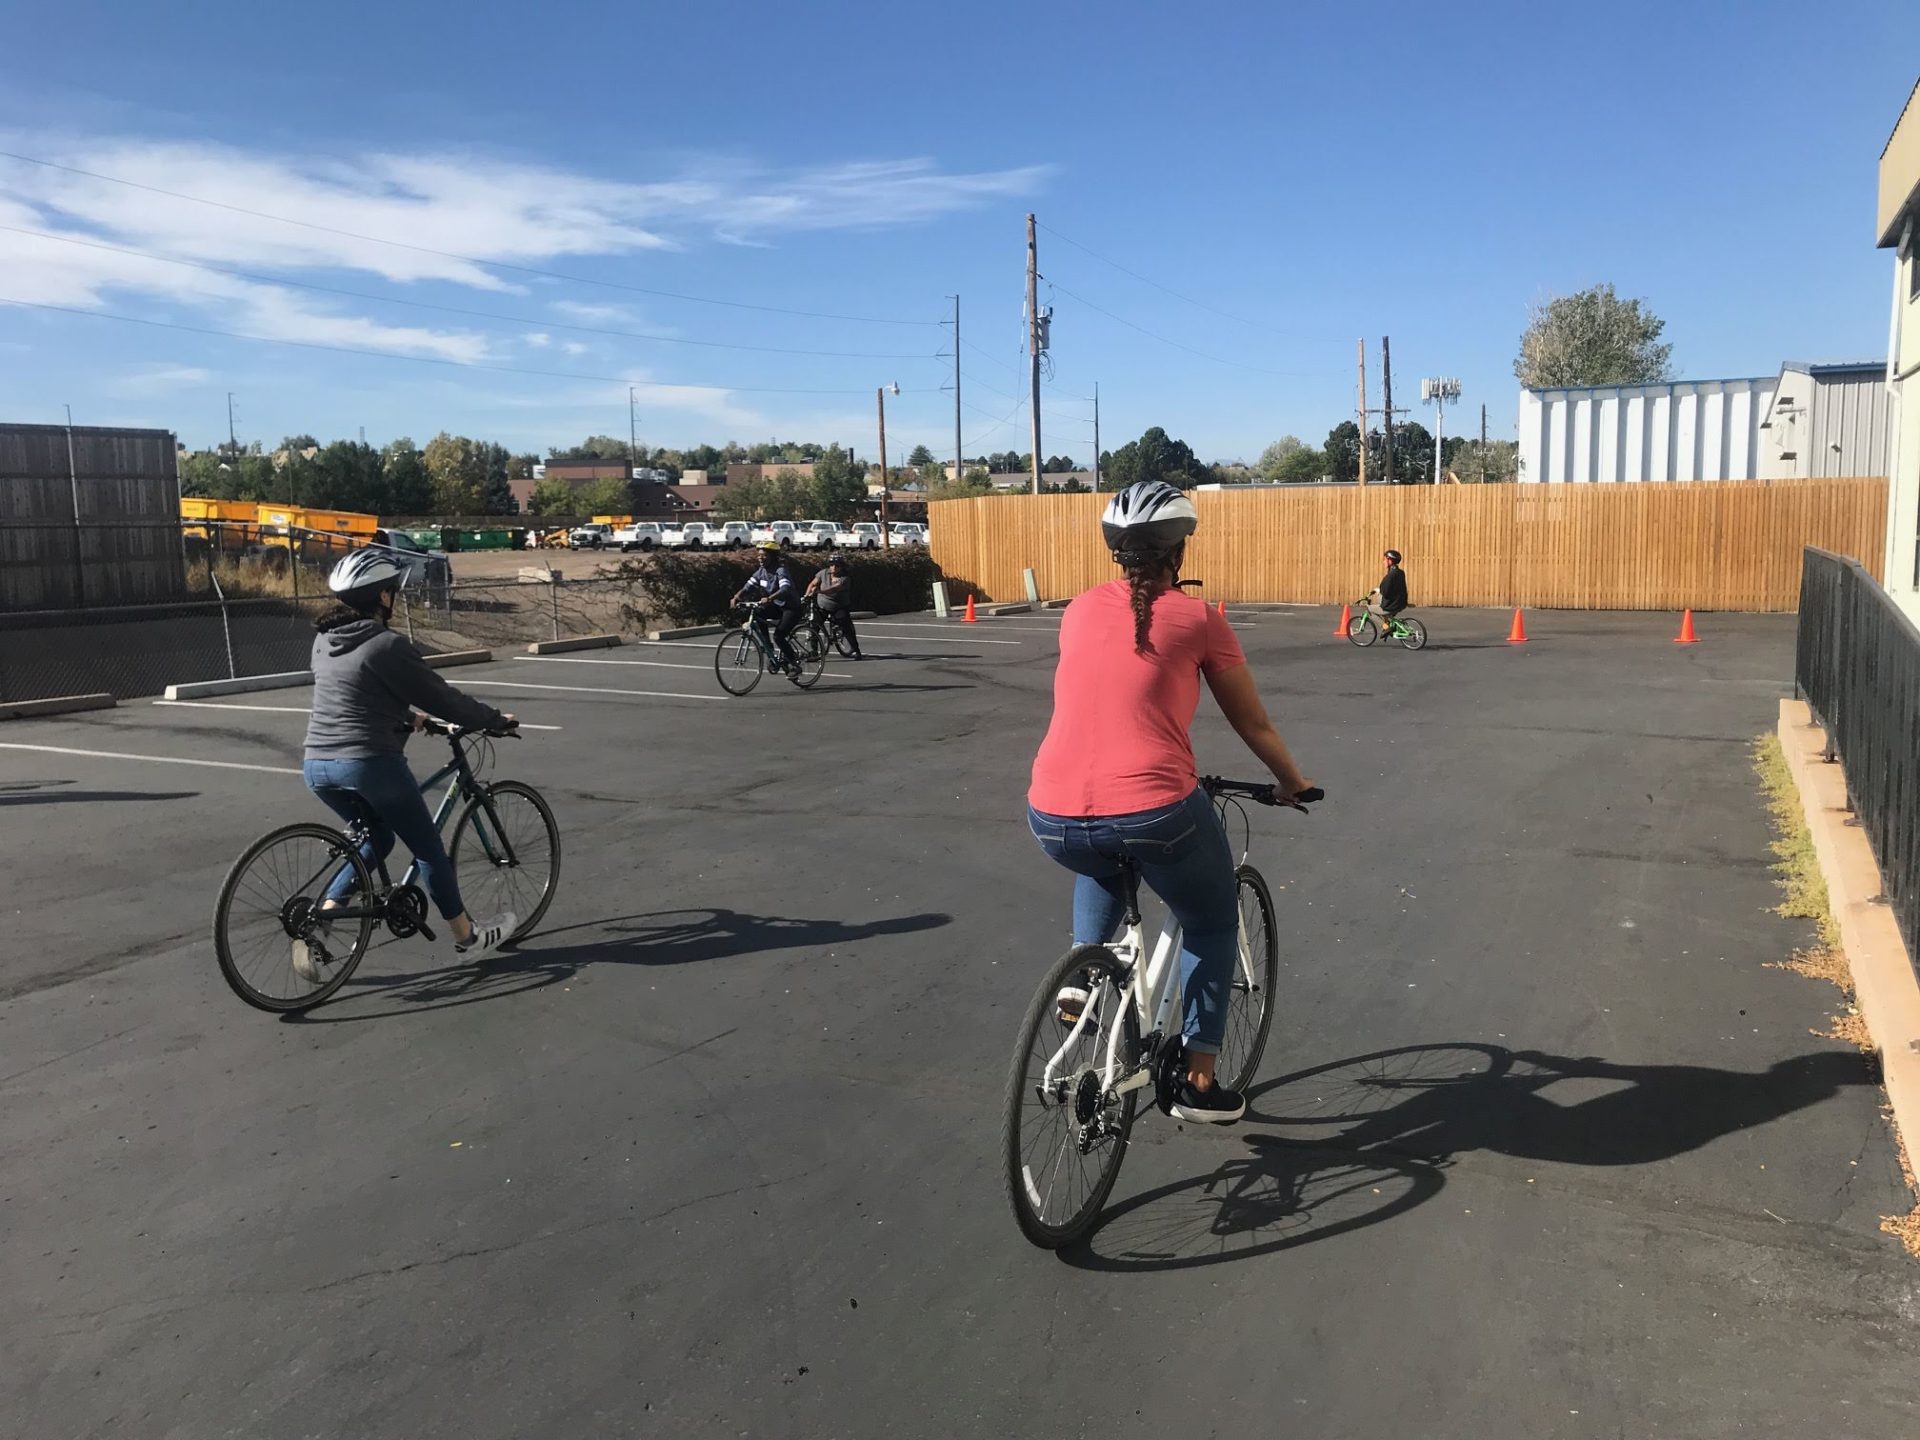 Adults and children learning to ride bicycles in a parking lot.